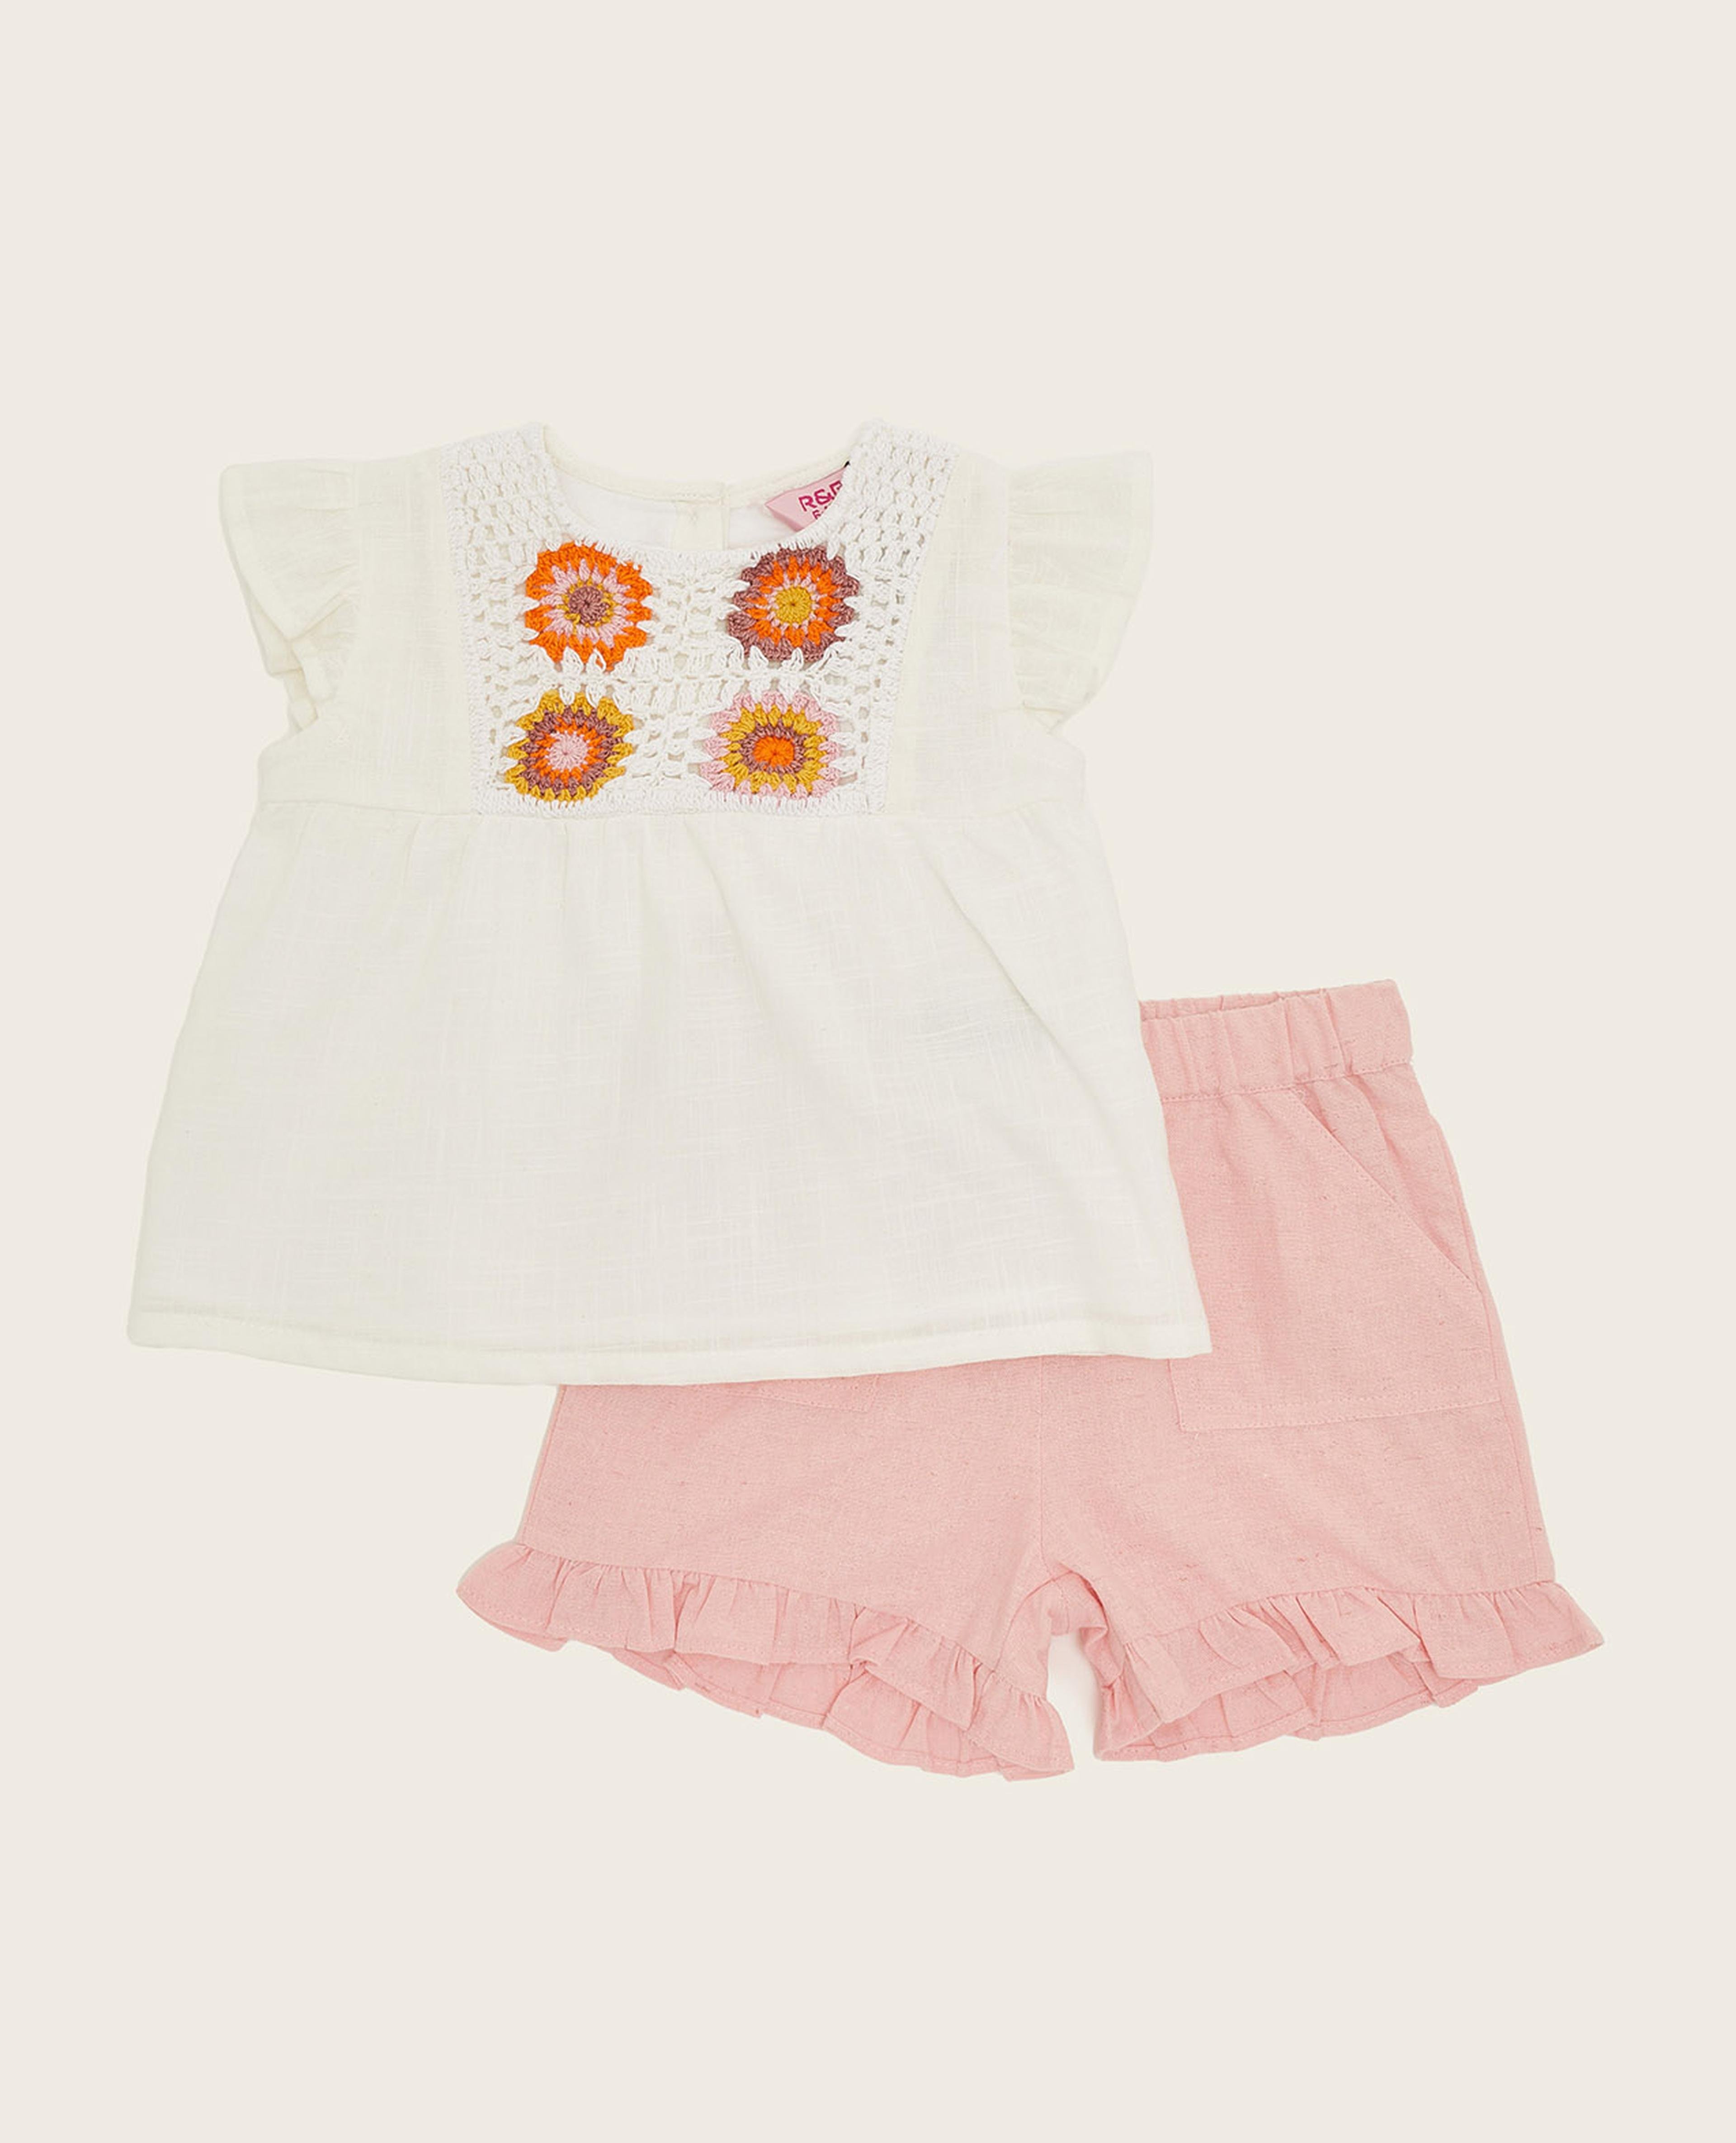 Crochet Embroidered Clothing Set